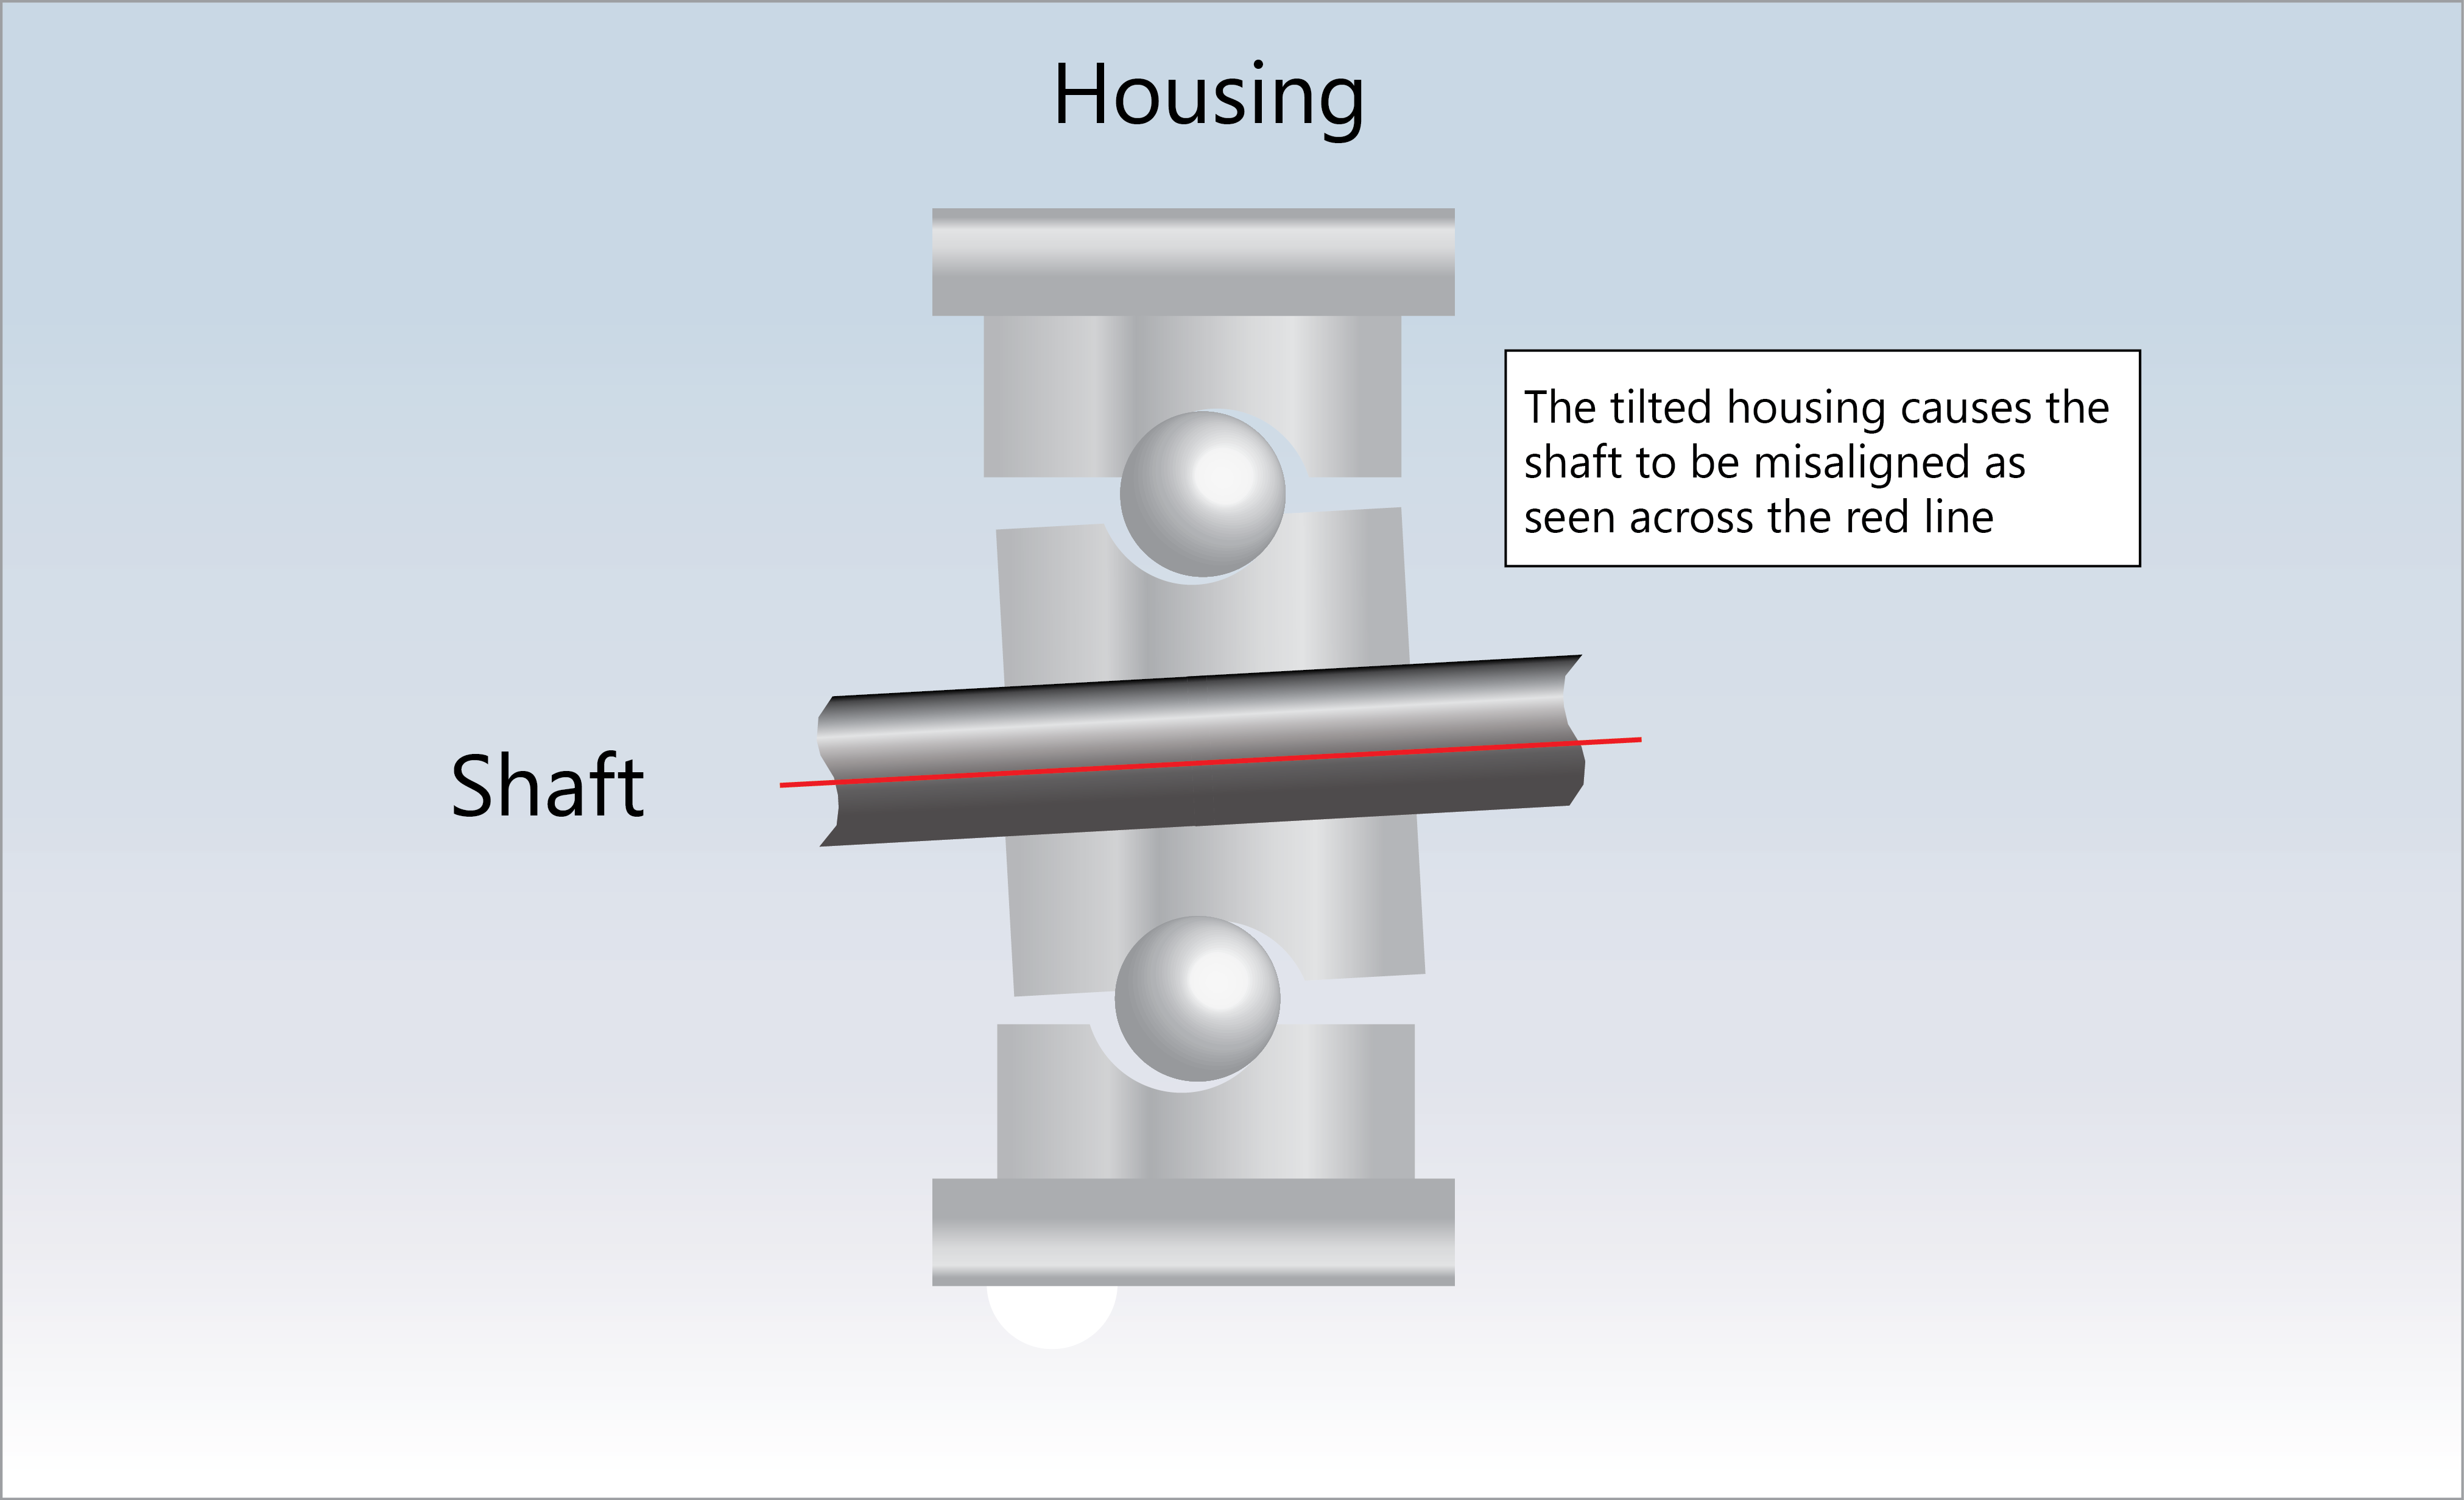 The illustration shows a tilted housing and a misaligned shaft